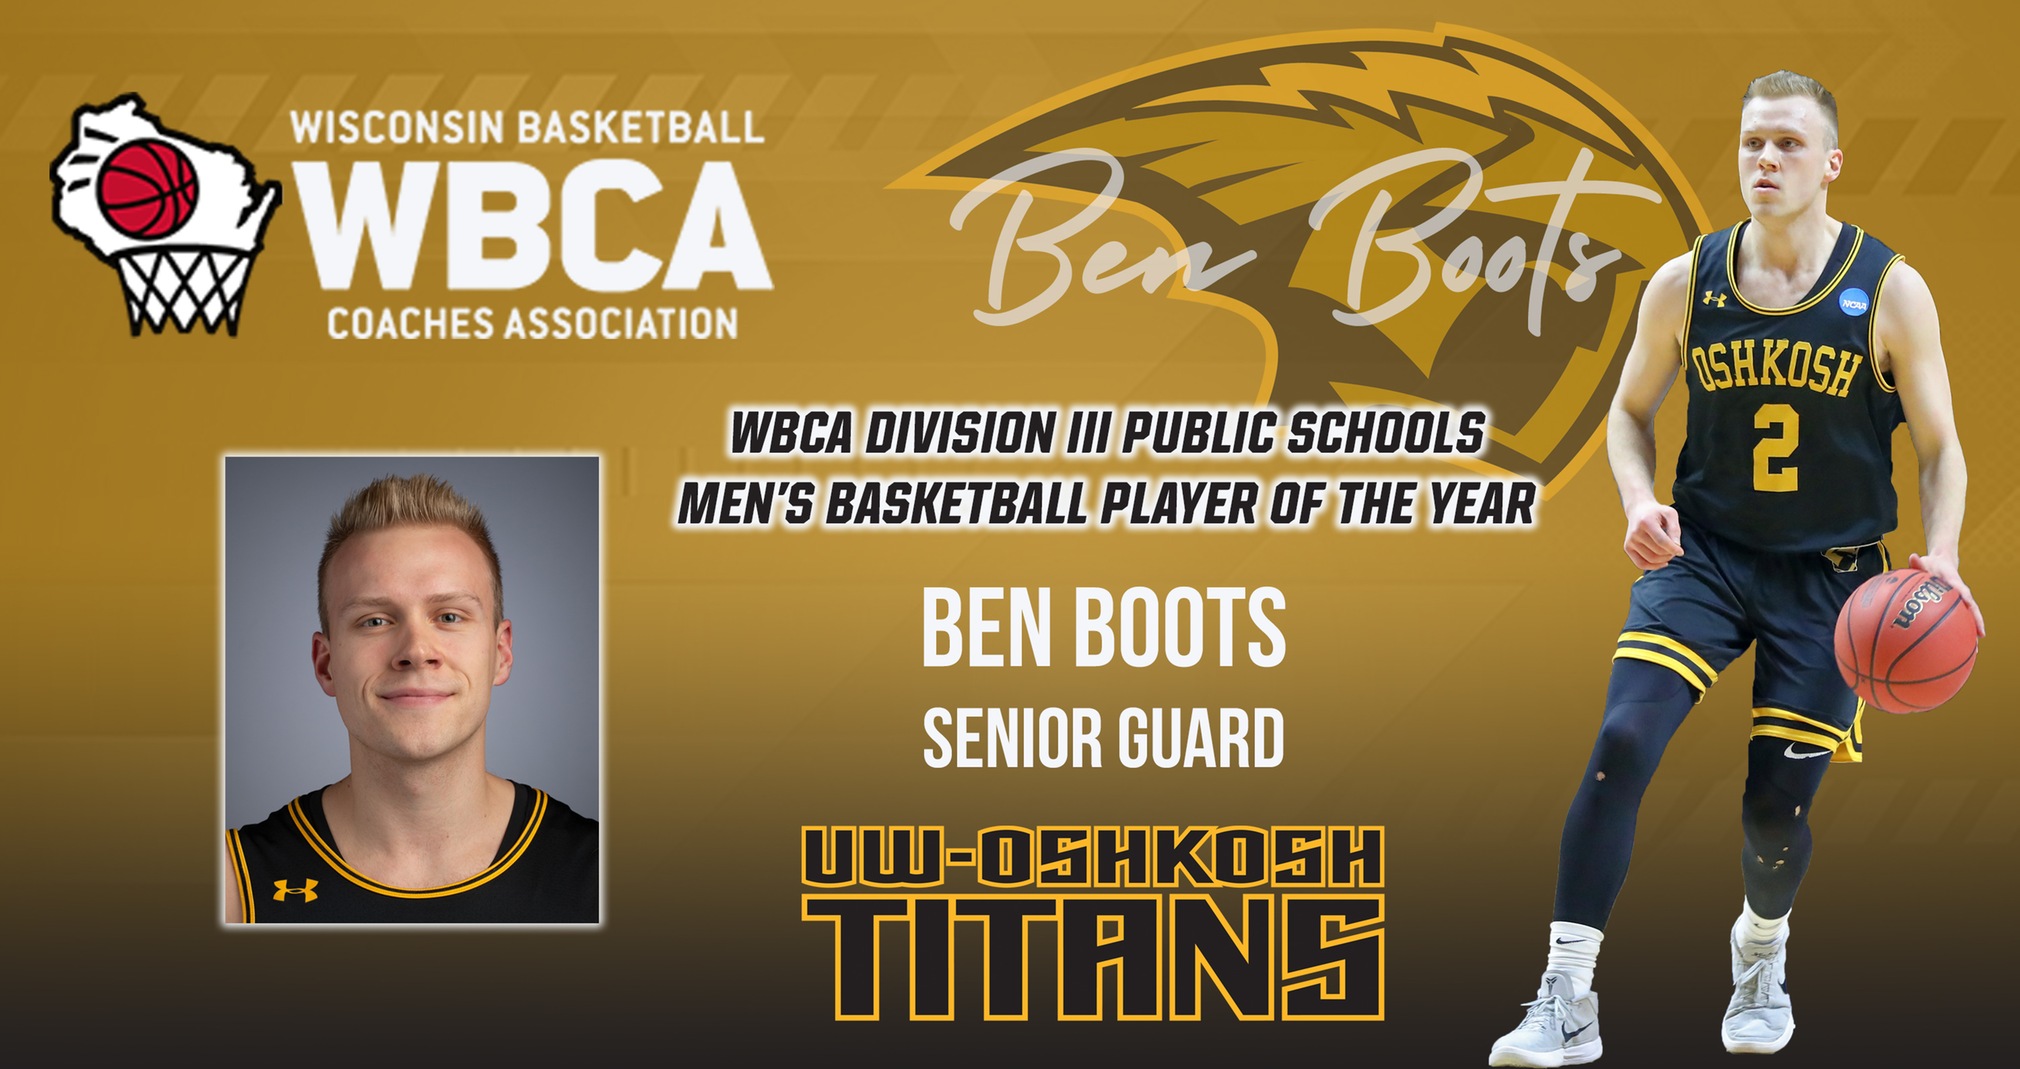 Boots Selected As WBCA Division III Public Schools Player Of The Year